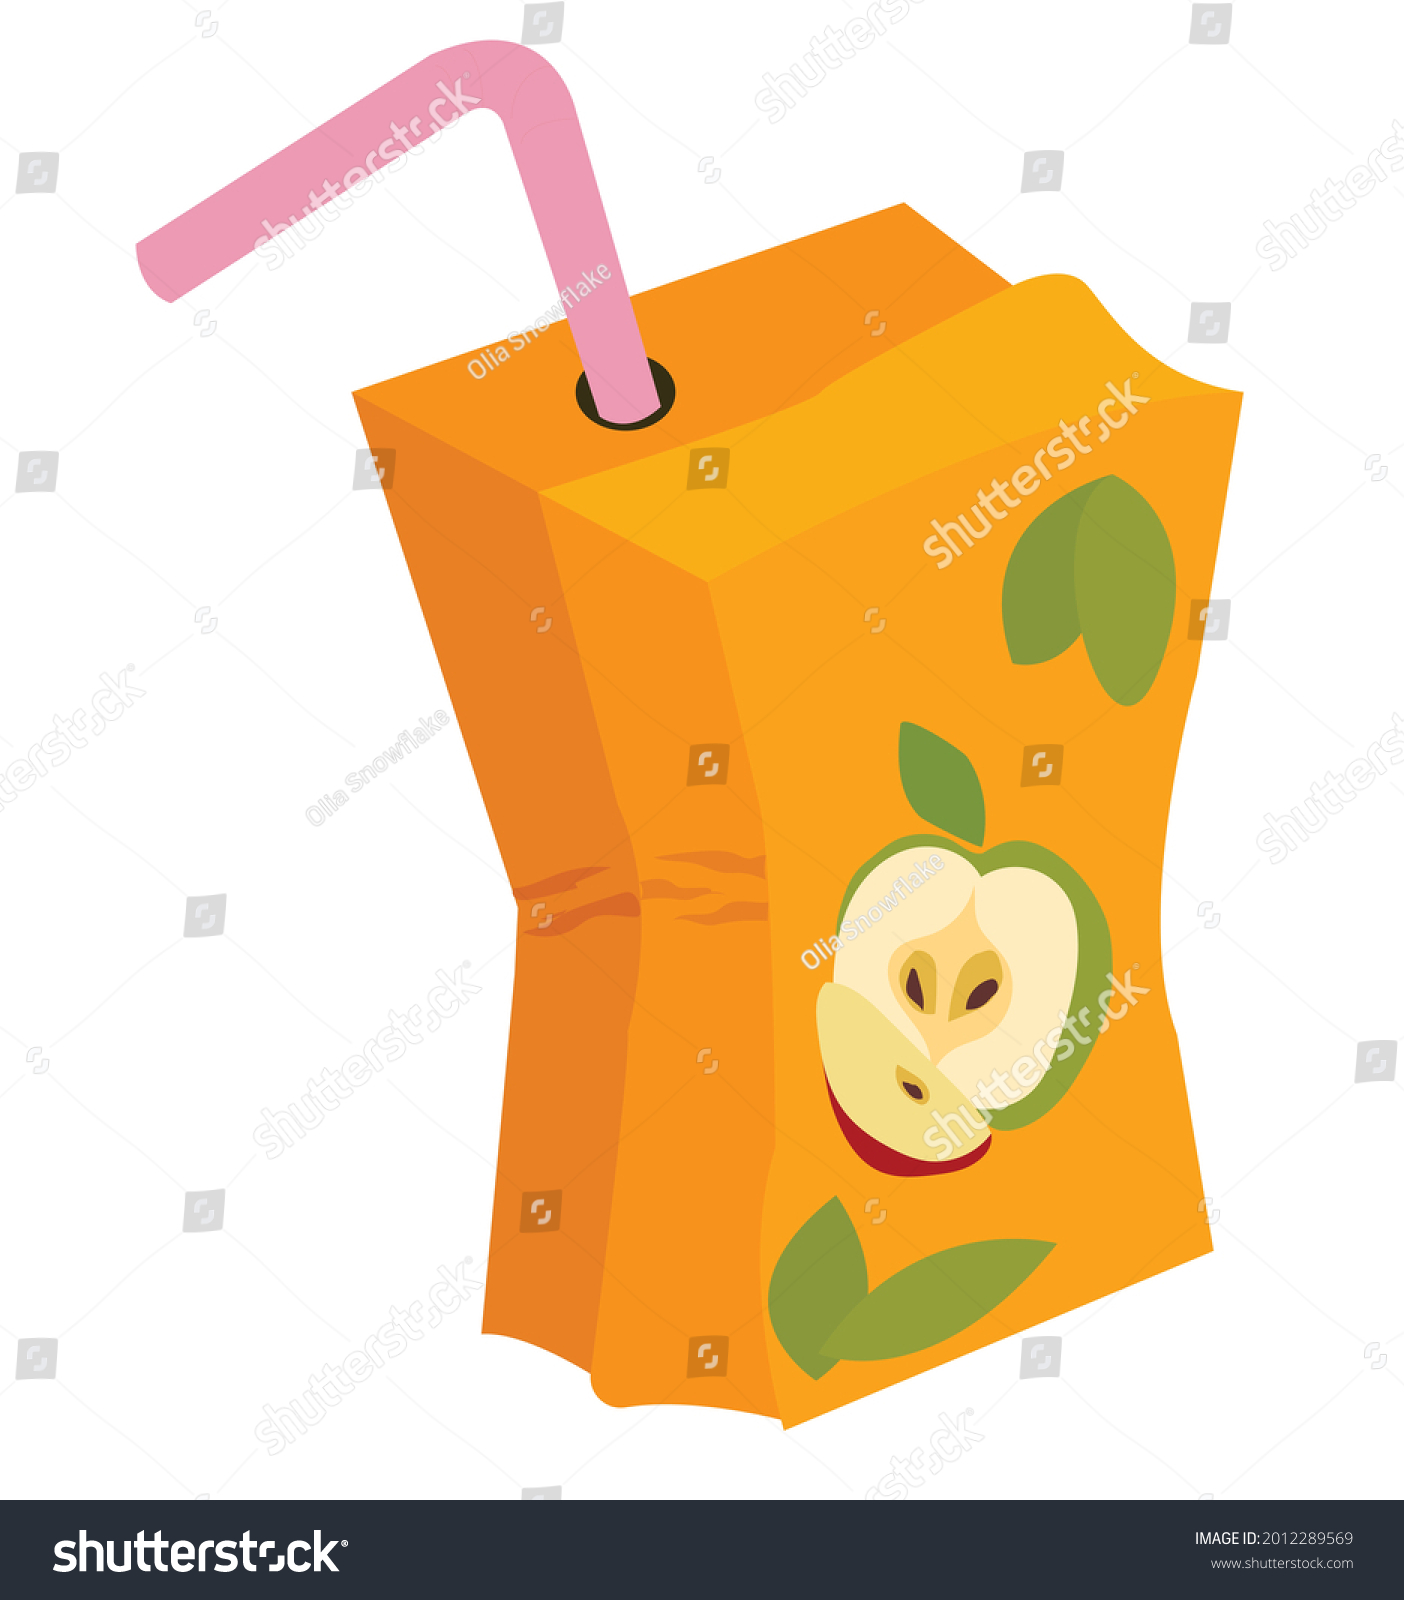 SVG of Crumpled paper juice box with a straw. Vector stock illustration in cartoon style. svg